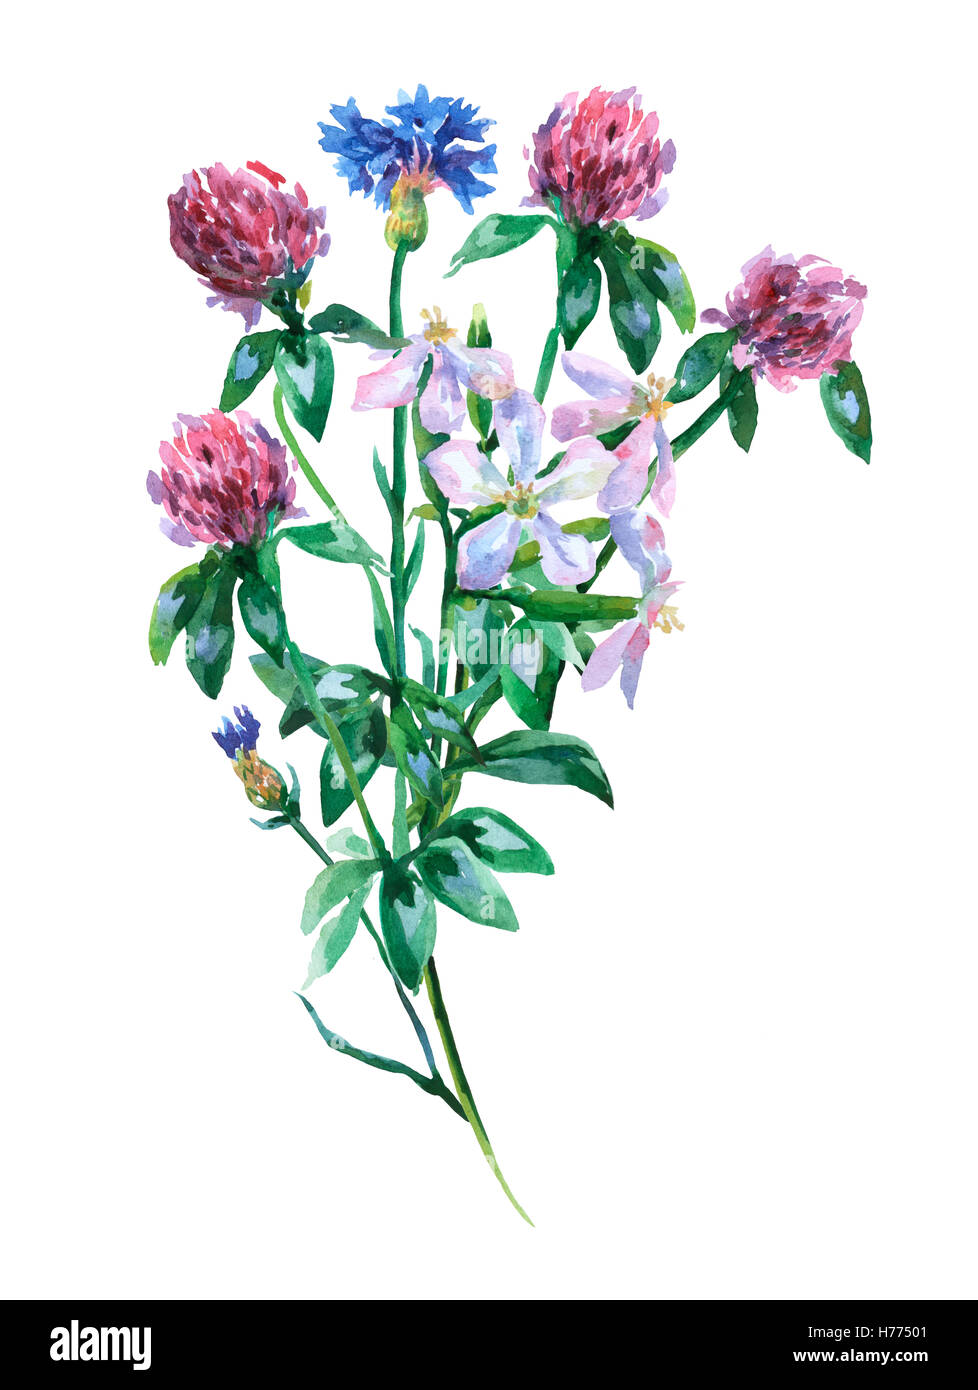 Blue cornflower, saponaria and pink clover shamrock bouquet. Watercolor hand painting illustration on isolate white background. Stock Photo